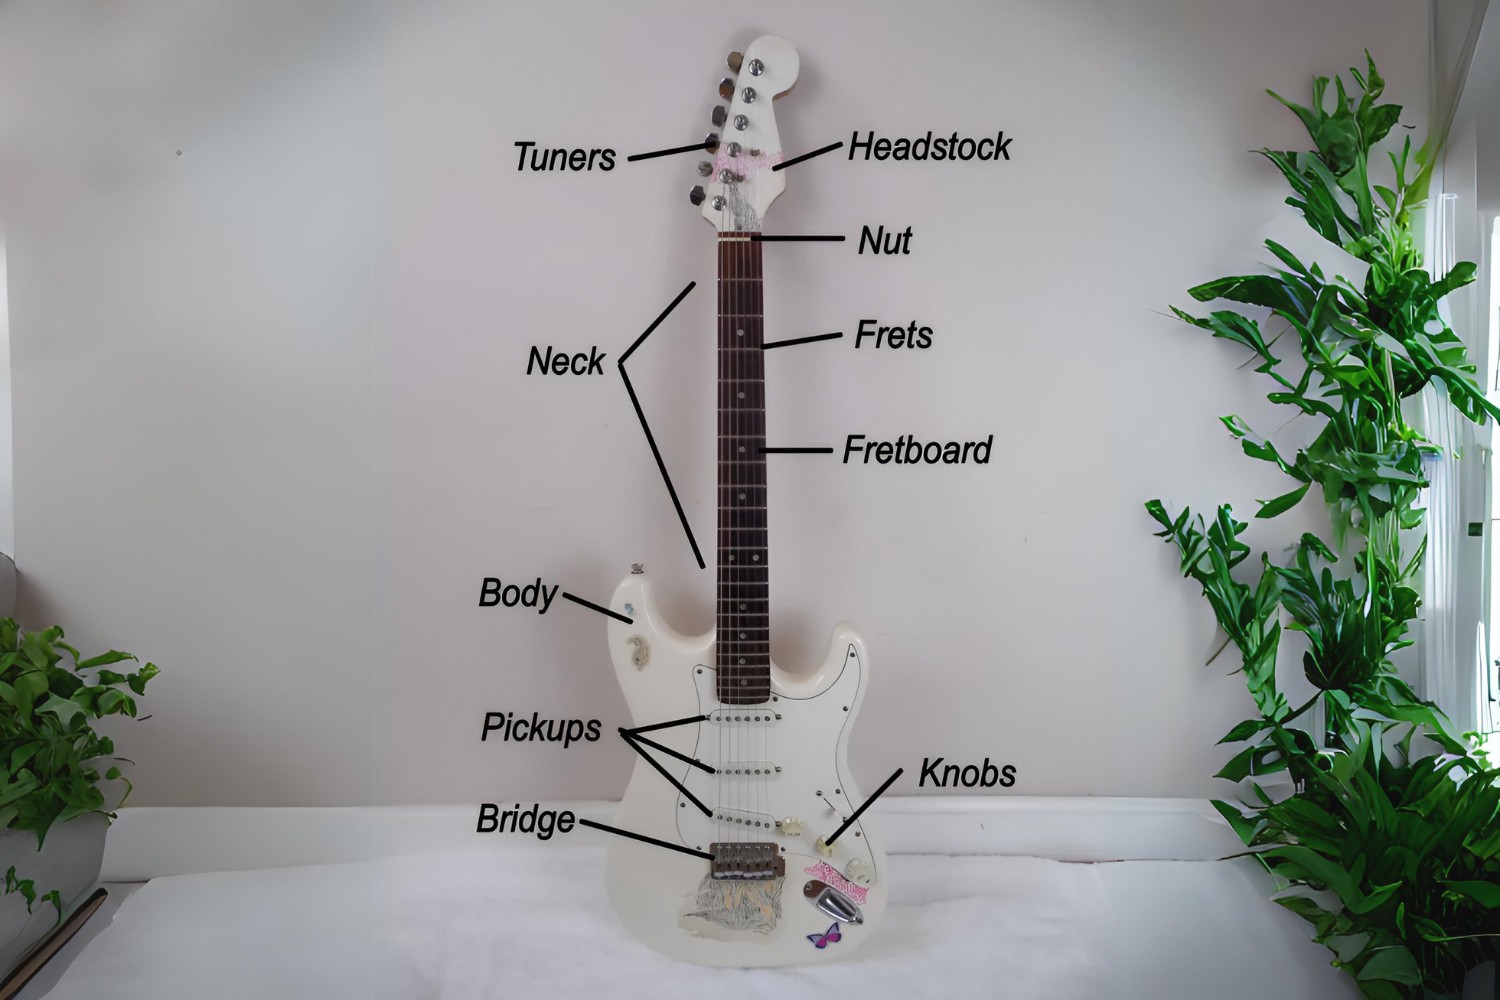 what-are-the-parts-of-an-electric-guitar-called